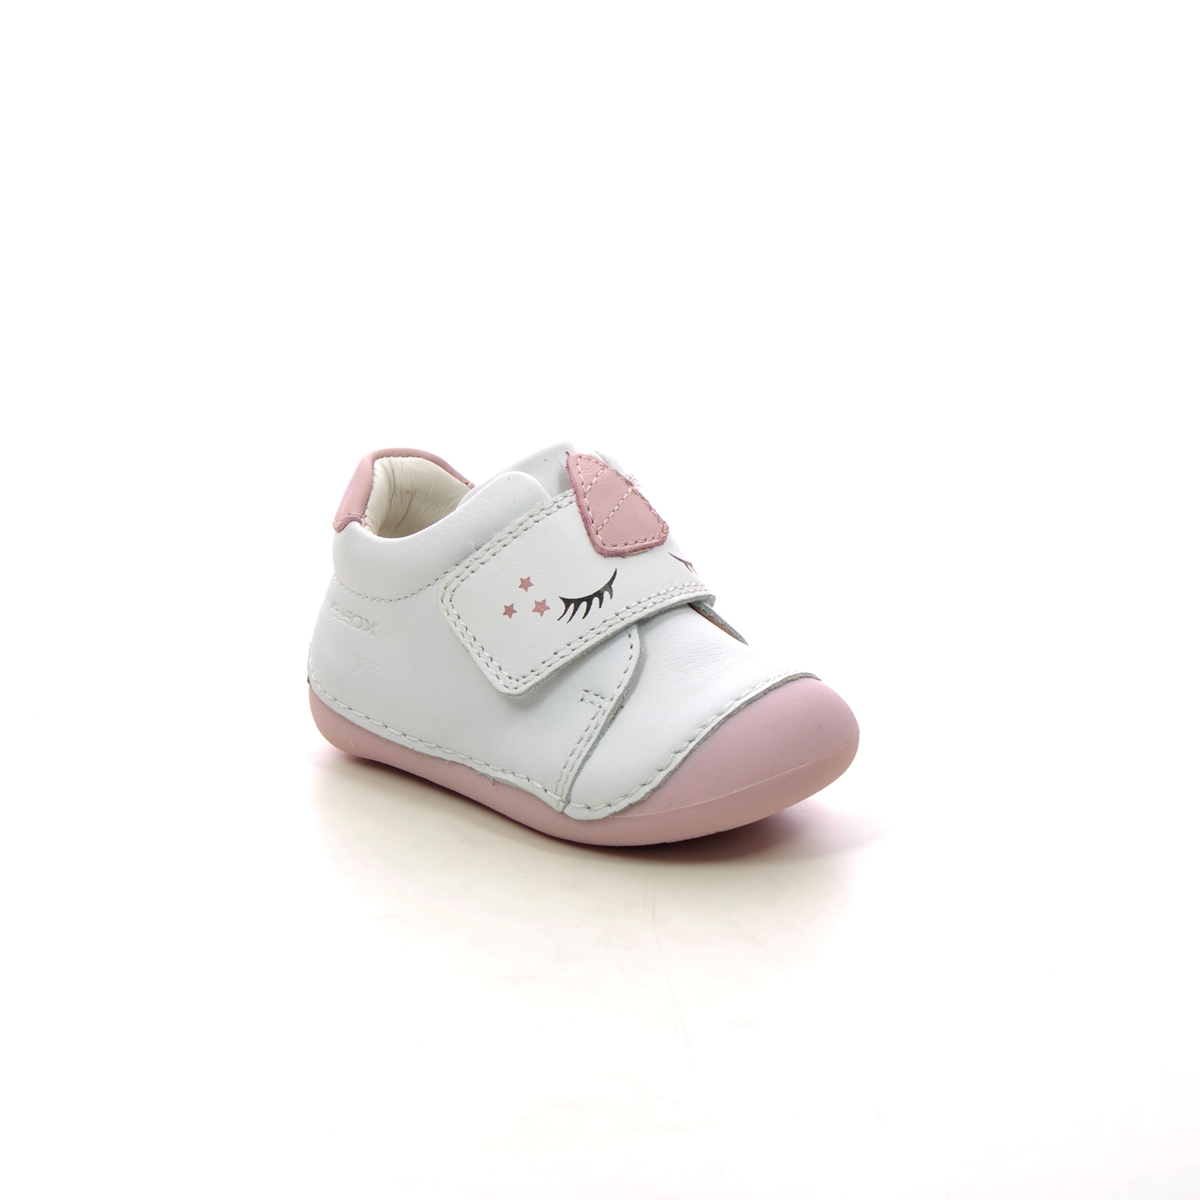 Geox Tutim 1v Unicorn White Leather Kids girls first and baby shoes B3540B-C1Z8W in a Plain Leather in Size 19